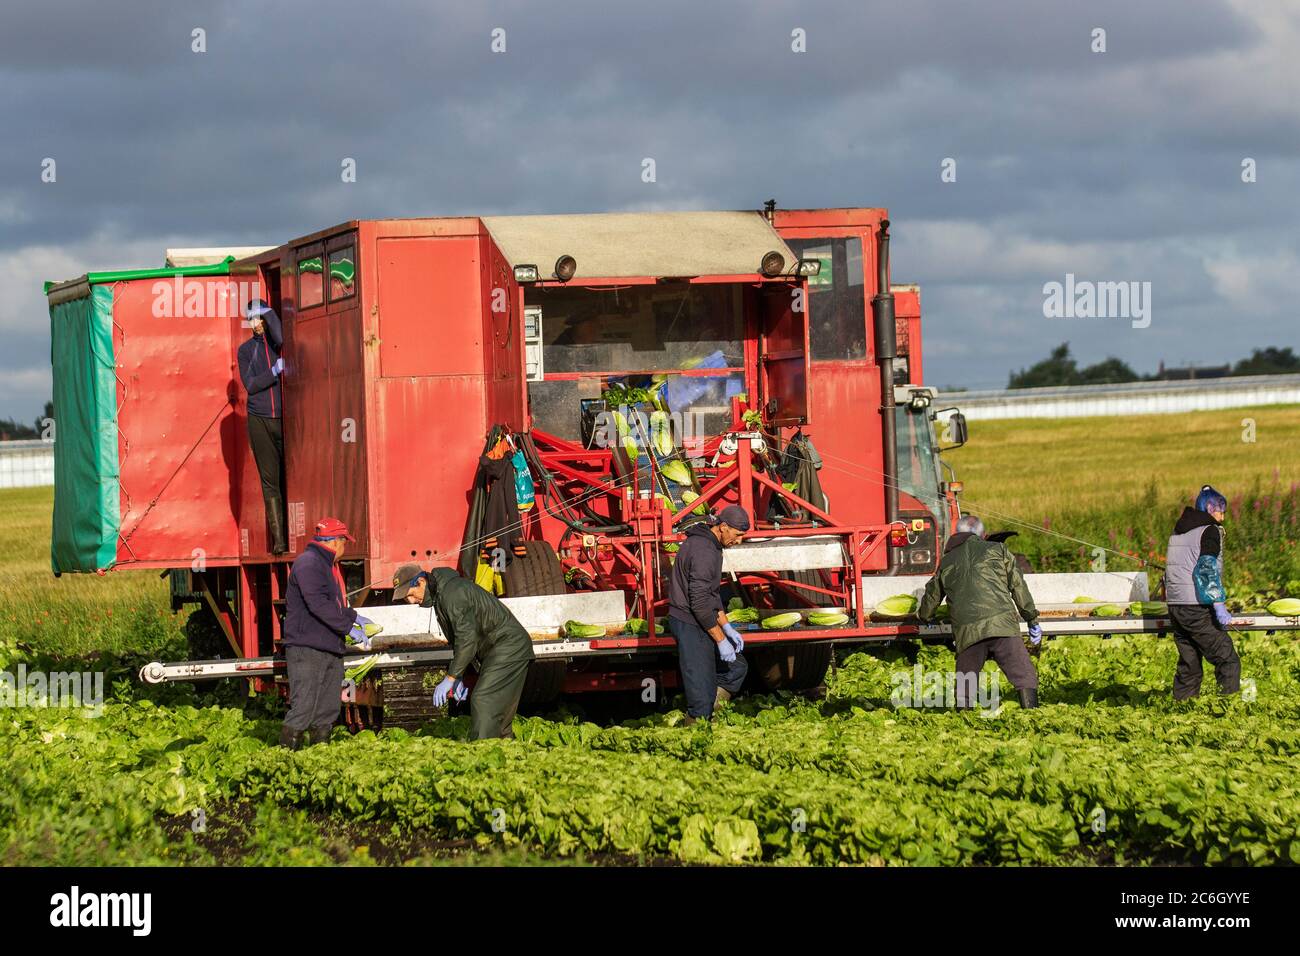 Summer Lettuce harvesting in Tarleton, Lancashire. July, 2020. UK Weather. EU migrant workers harvesting lettuce on sunny showery morning in the area known as 'The Salad Bowl' of West Lancashire. Farms have been hit with a shortage of the European migrant workers that Britain relies on to bring in the vegetable and salad crops. This shortage means that local arms are now pooling workers, transporting them from farm to farm as required. The UK requires about 80,000 seasonal workers to pick the vegetable harvest and virtually all come from Eastern Europe. Stock Photo